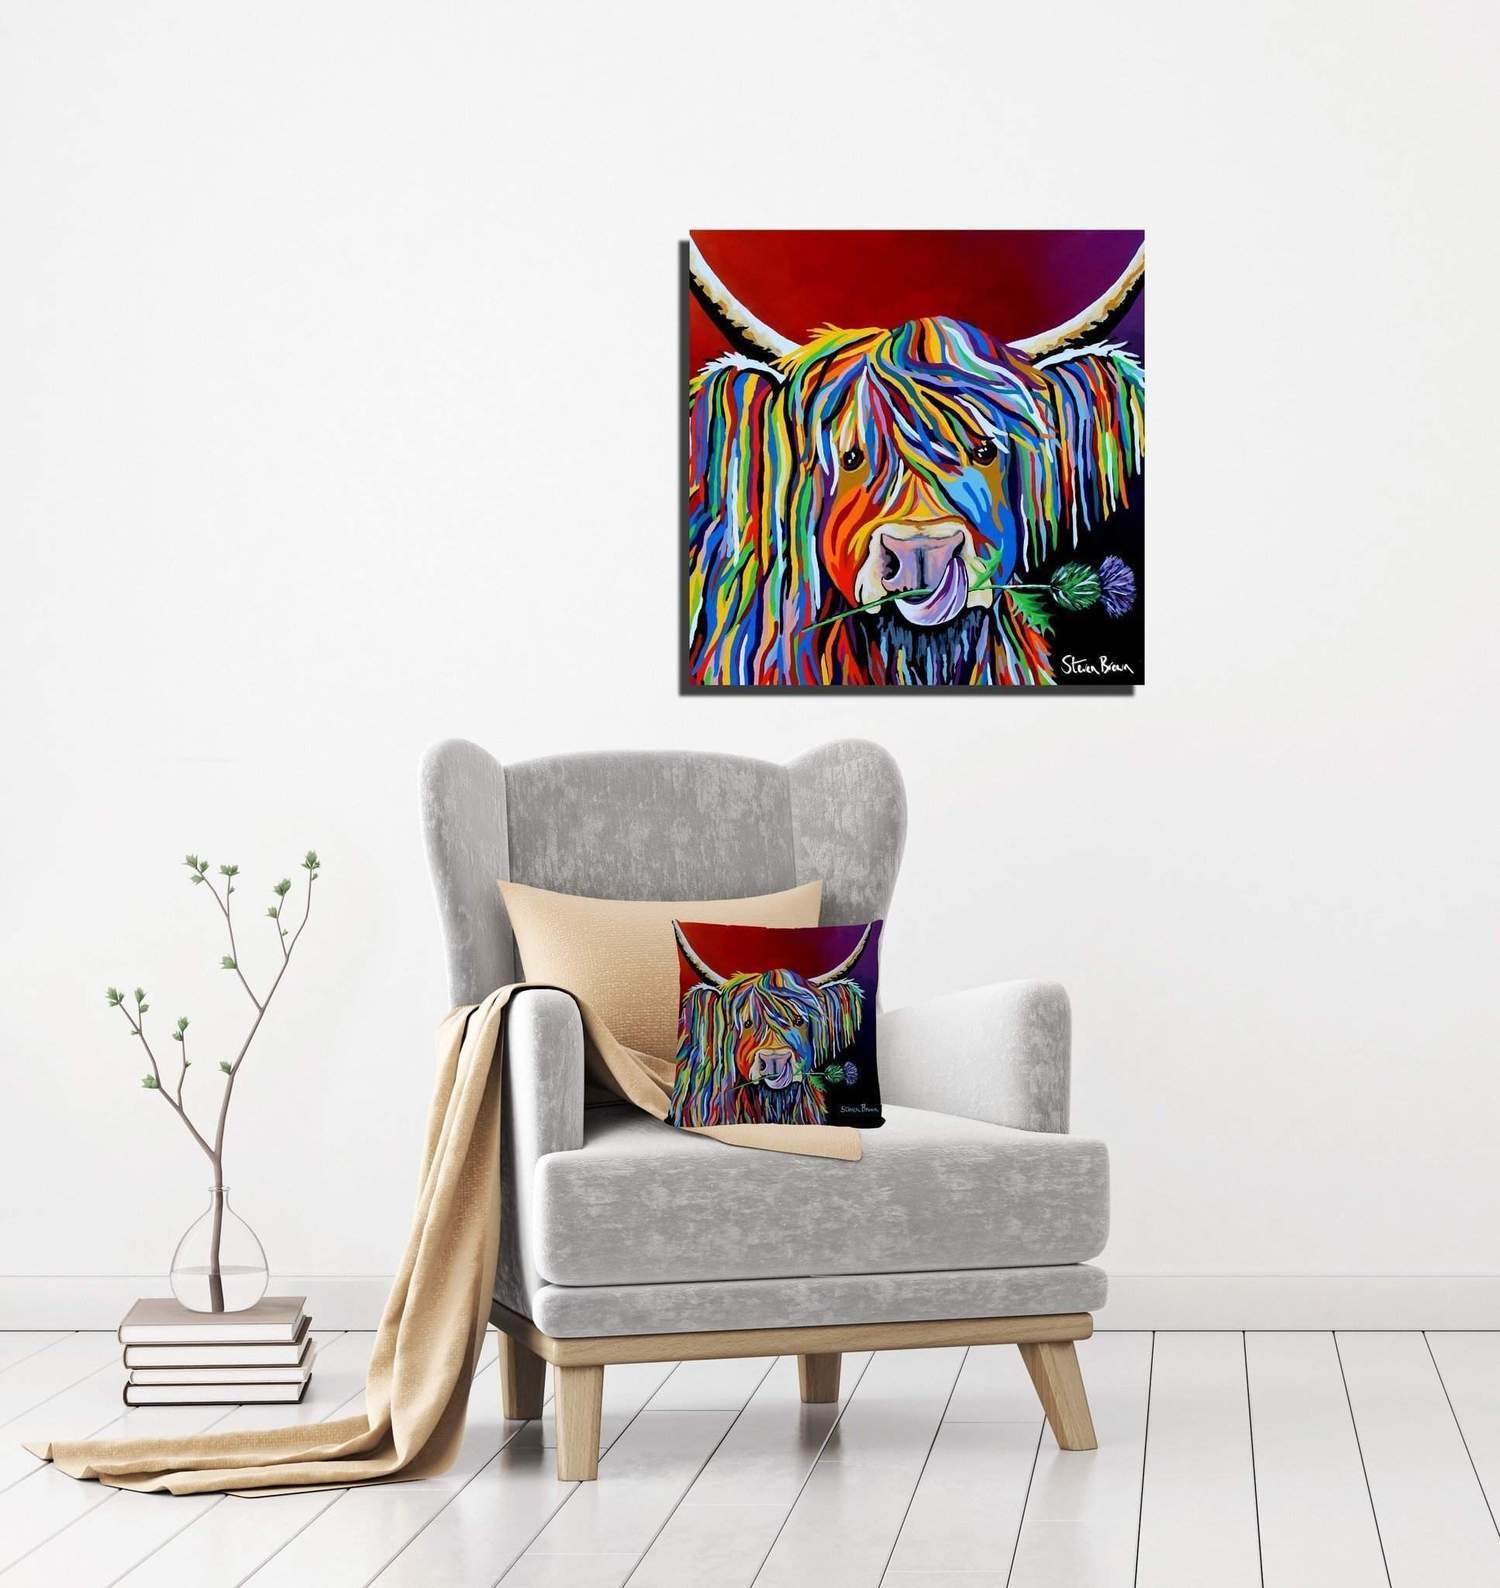 Lizzie McCoo 16x16 stretched canvas (Steven Brown Art)